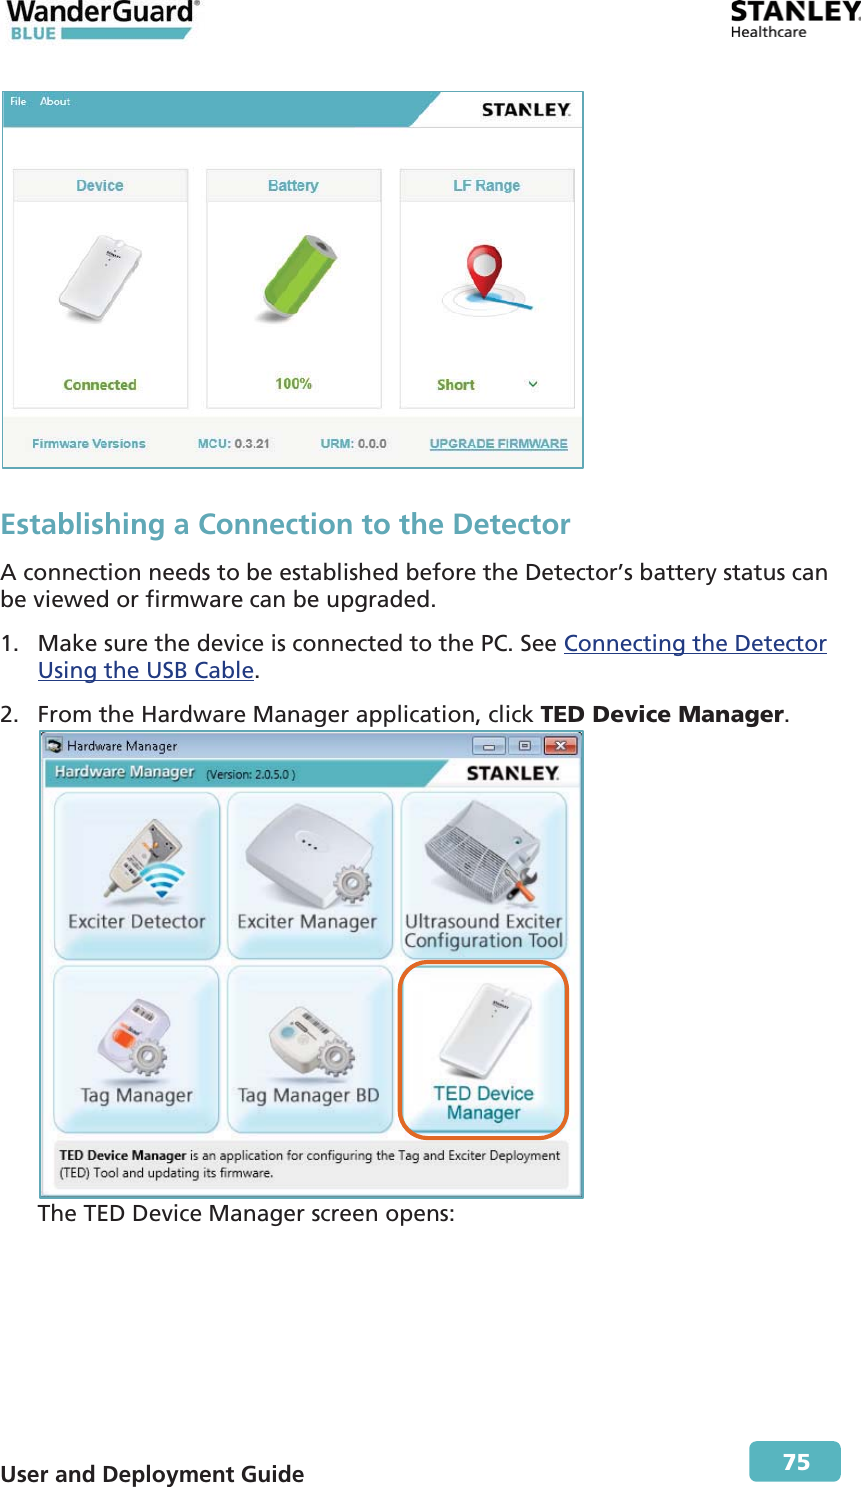  User and Deployment Guide        75  Establishing a Connection to the Detector A connection needs to be established before the Detector’s battery status can be viewed or firmware can be upgraded. 1. Make sure the device is connected to the PC. See Connecting the Detector Using the USB Cable. 2. From the Hardware Manager application, click TED Device Manager.  The TED Device Manager screen opens:  